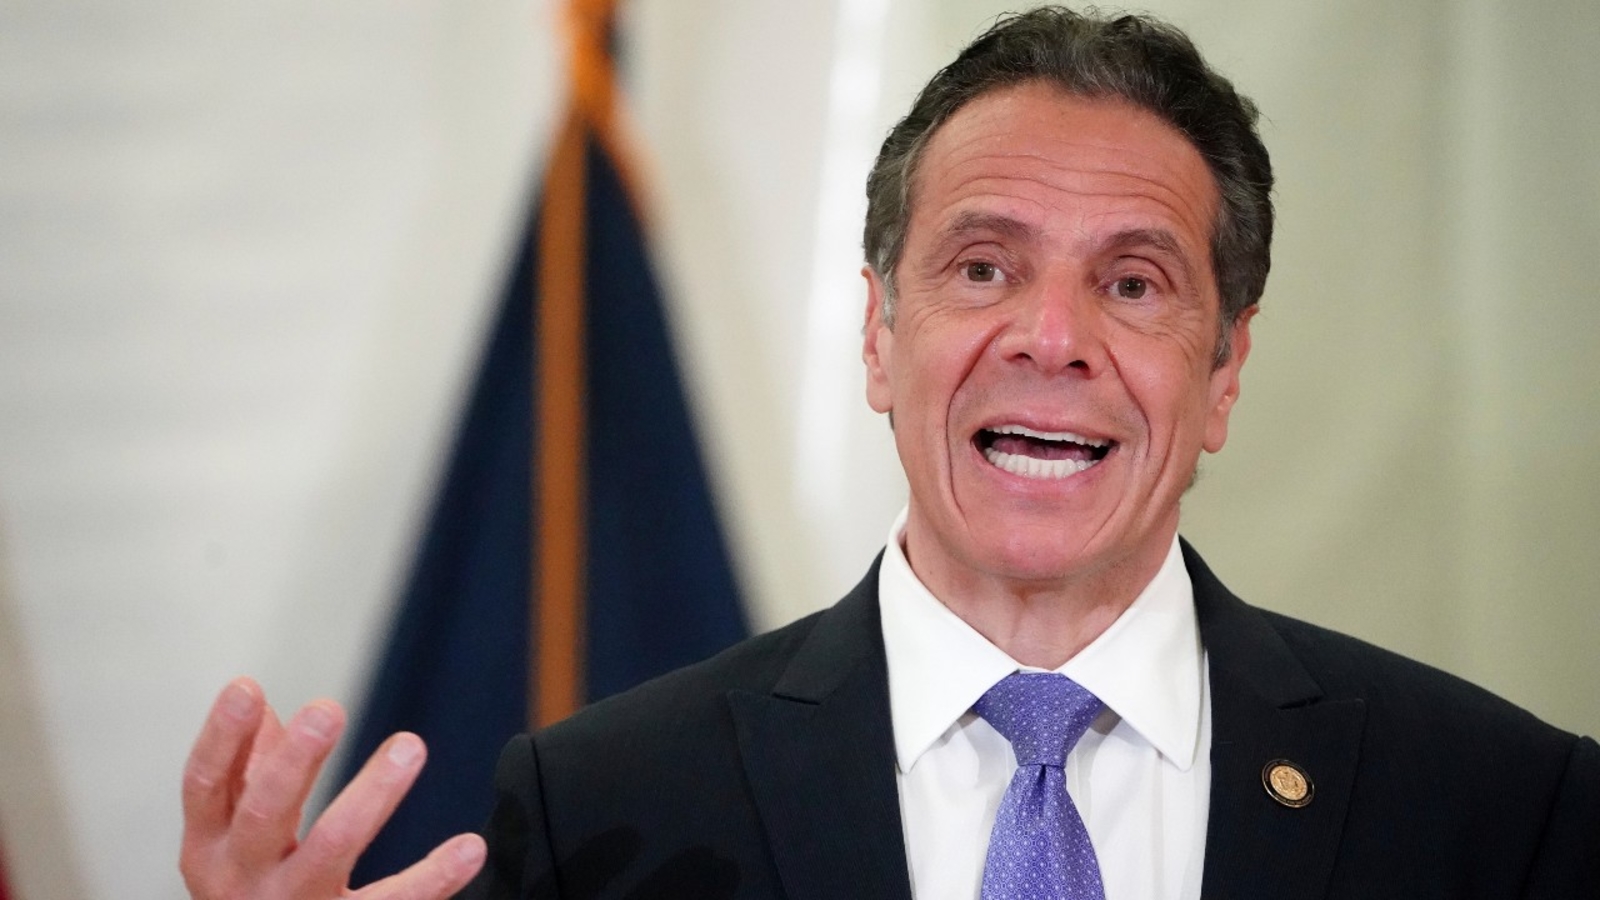 Cuomo to be questioned this weekend in sexual harassment probe